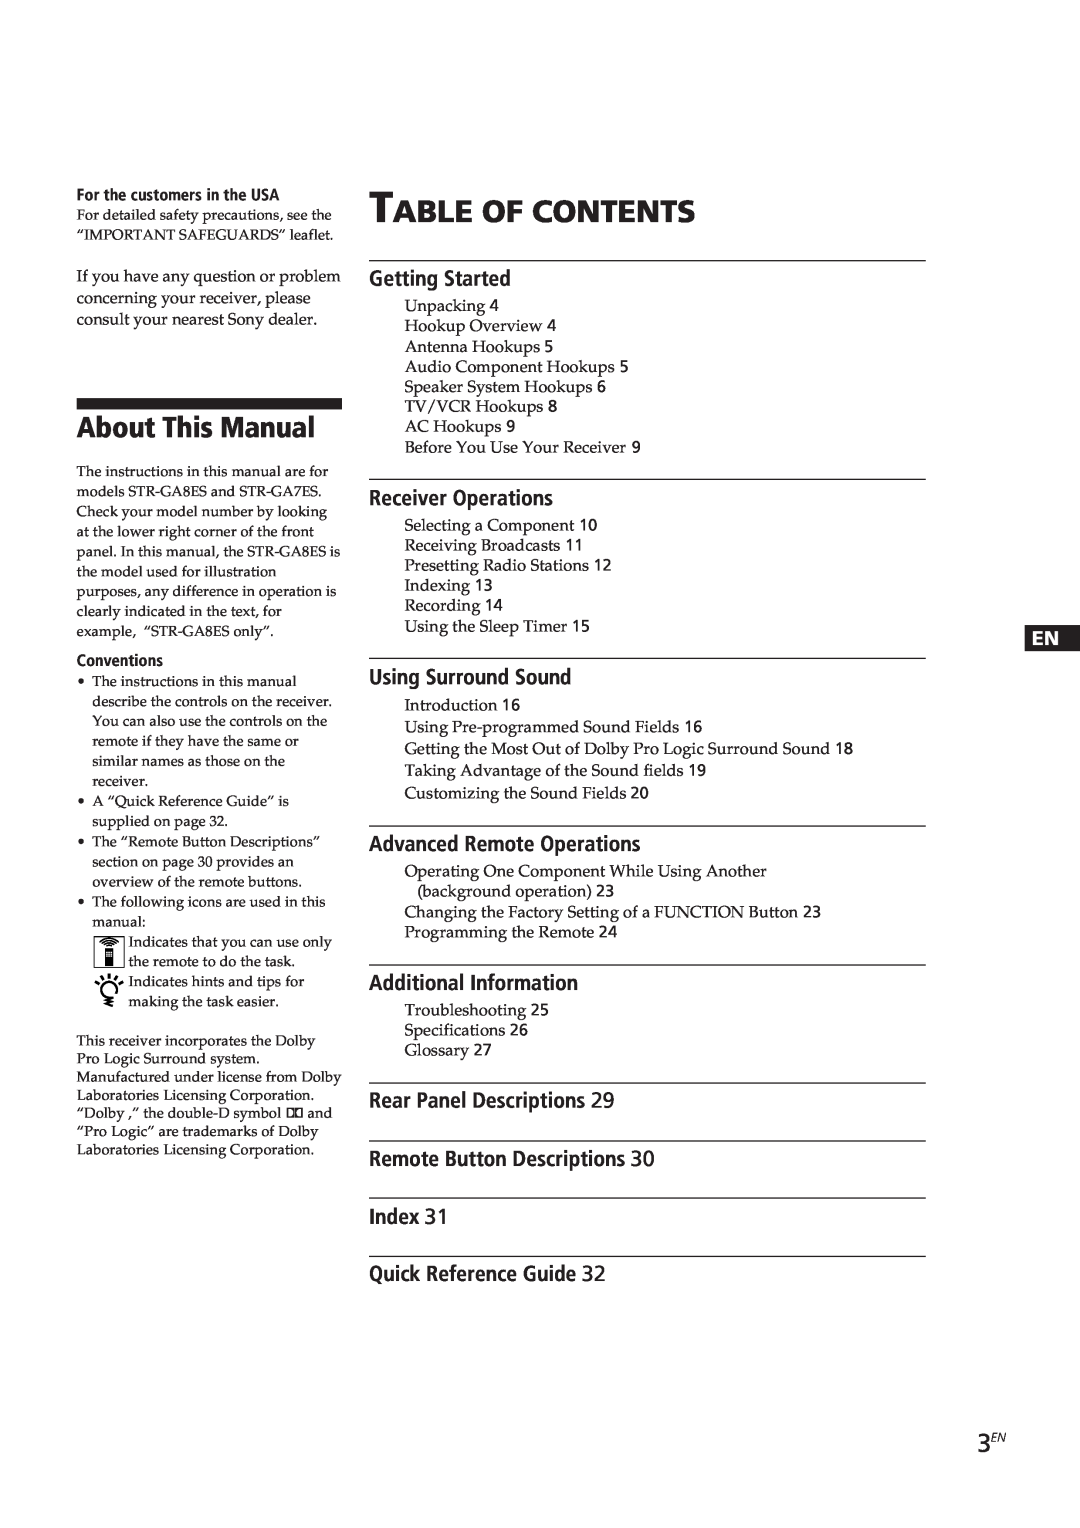 Sony STR-GA7ES, STR-GA8ES Table Of Contents, About This Manual, Getting Started, Receiver Operations, Using Surround Sound 